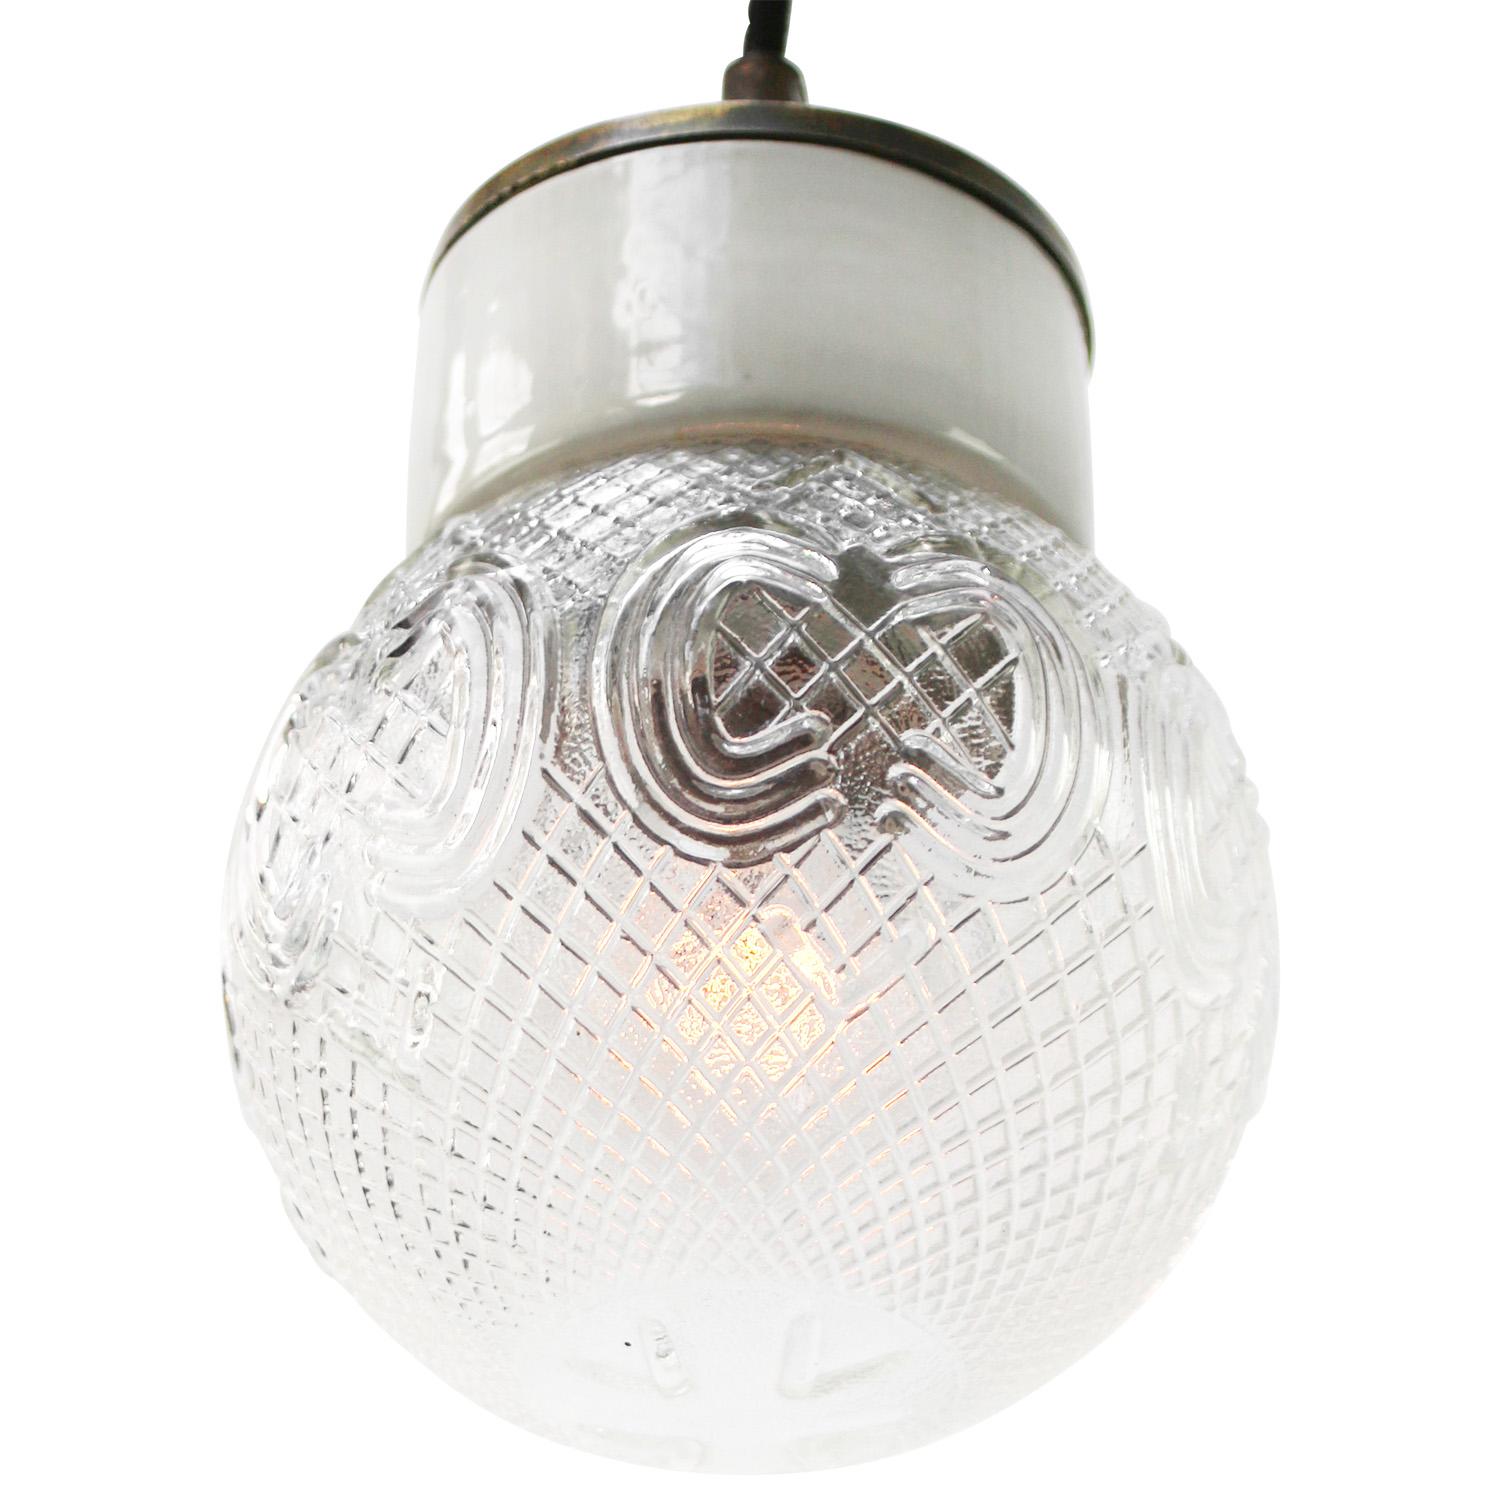 Porcelain industrial hanging lamp.
White porcelain, brass and clear texture glass.
2 conductors, no ground.

Weight: 1.20 kg / 2.6 lb

Priced per individual item. All lamps have been made suitable by international standards for incandescent light